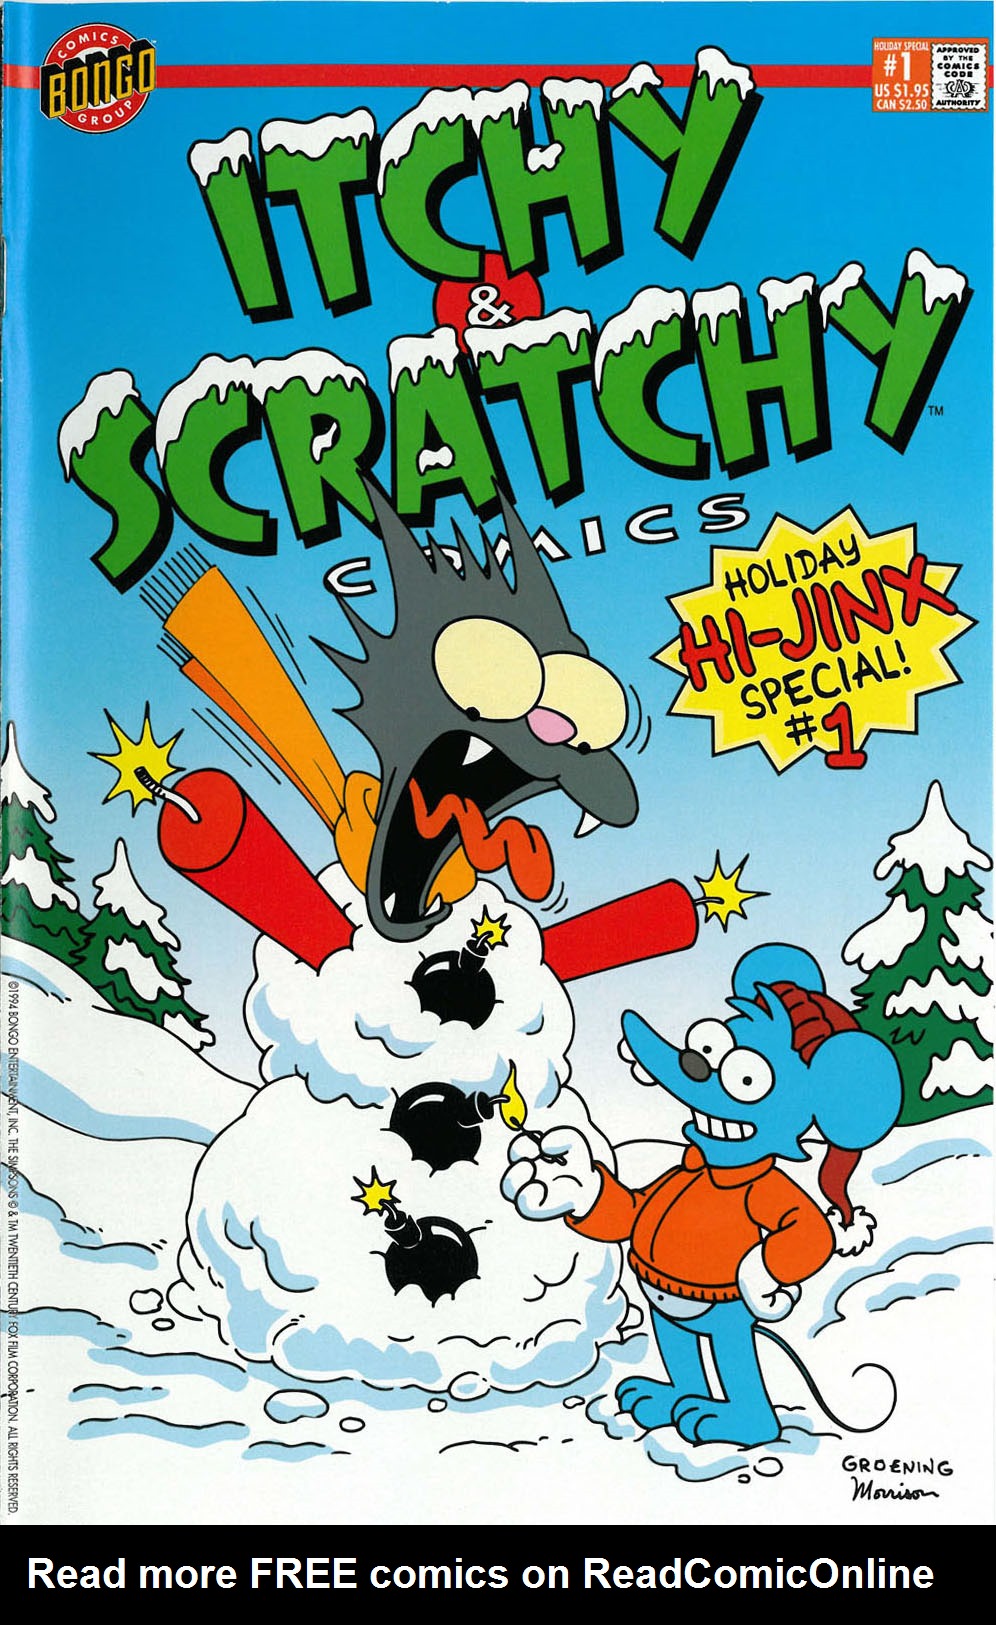 Read online Itchy & Scratchy Comics comic -  Issue #4 - 1